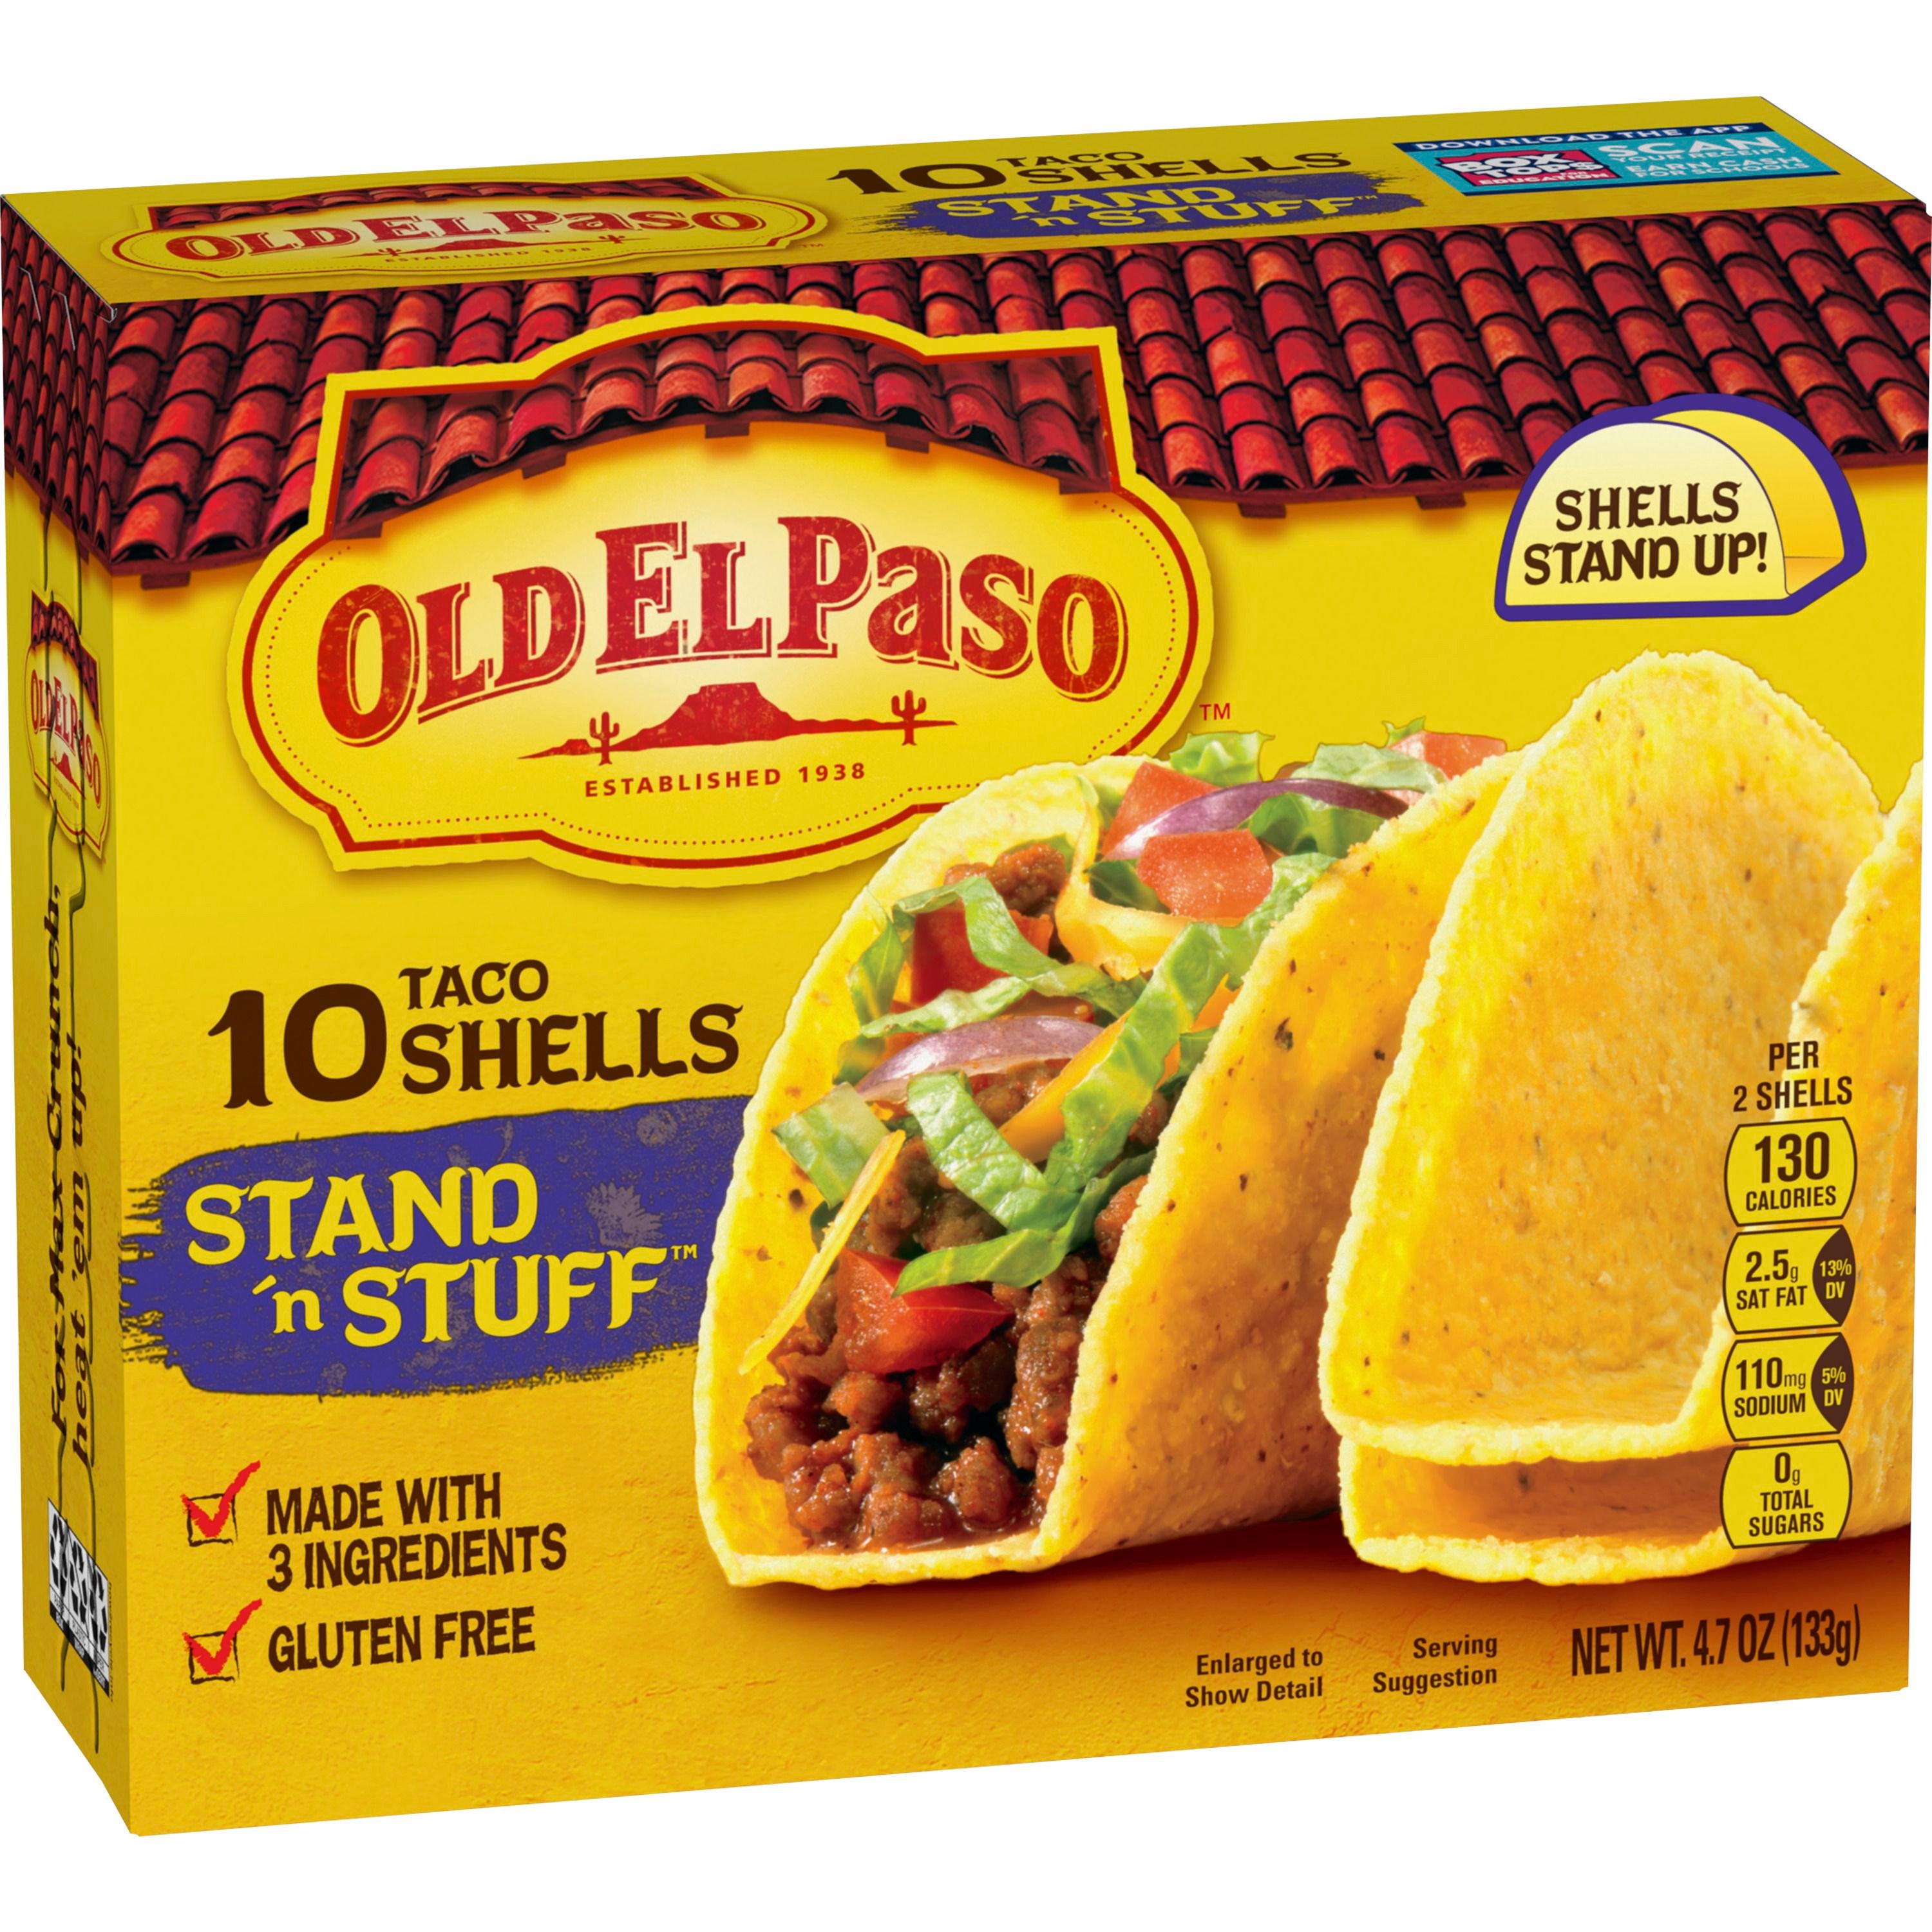 THE ORIGINAL Taco Toaster 2 Healthy Taco Shell Makers Crispy Healthy Tacos  Shells Right From Your Toaster - Crazy Sales